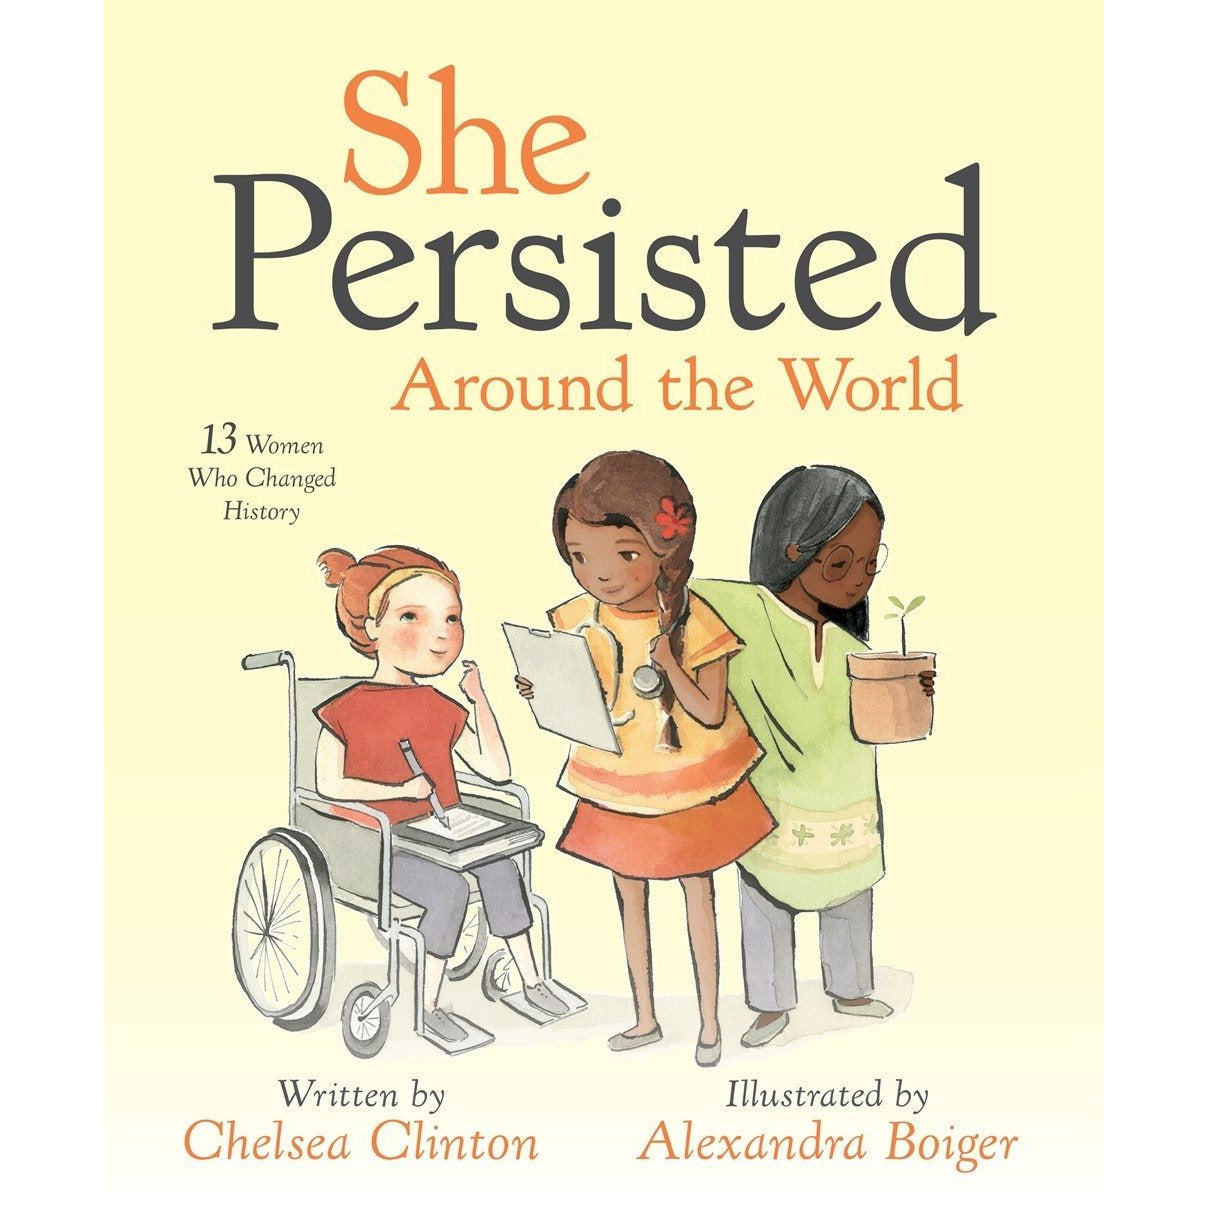 She Persisted Around the World - 13 Women Who Changed History (board book)